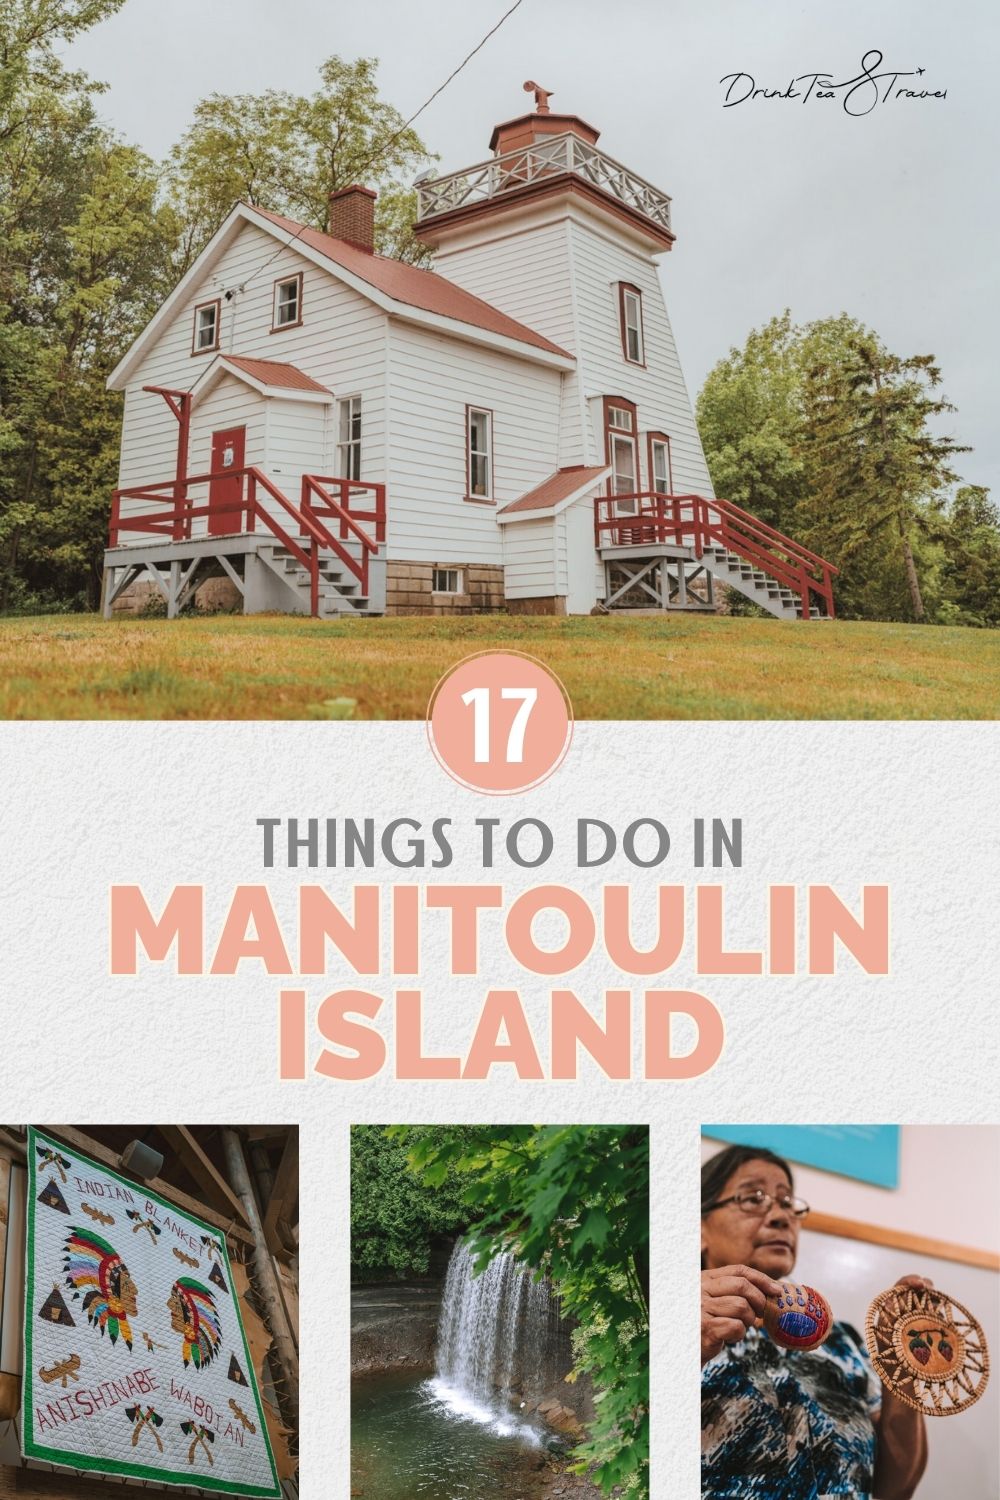 17 Things to Do in Manitoulin Island